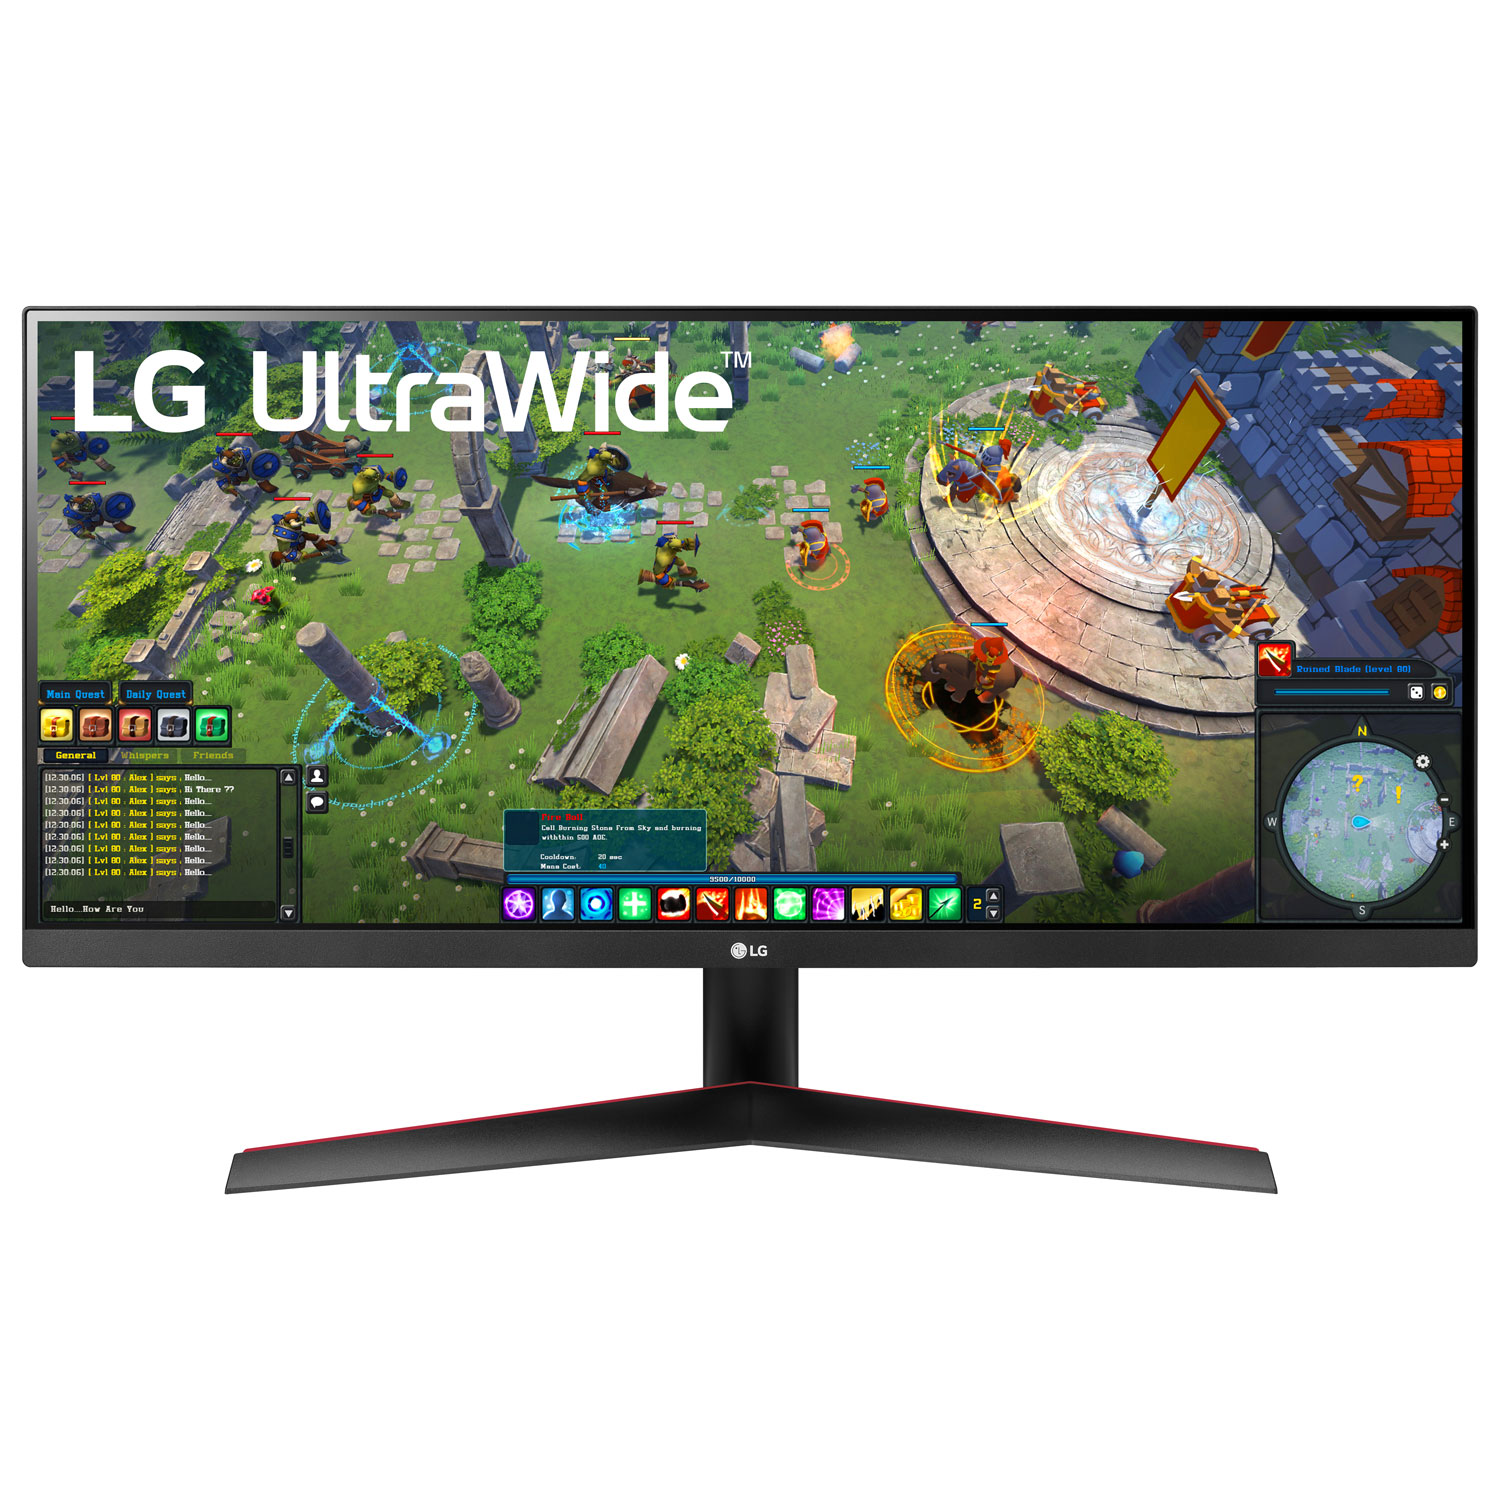 LG 29" FHD 75Hz 5ms GTG IPS LED FreeSync Gaming Monitor (29WP60G-B) - Black - Only at Best Buy